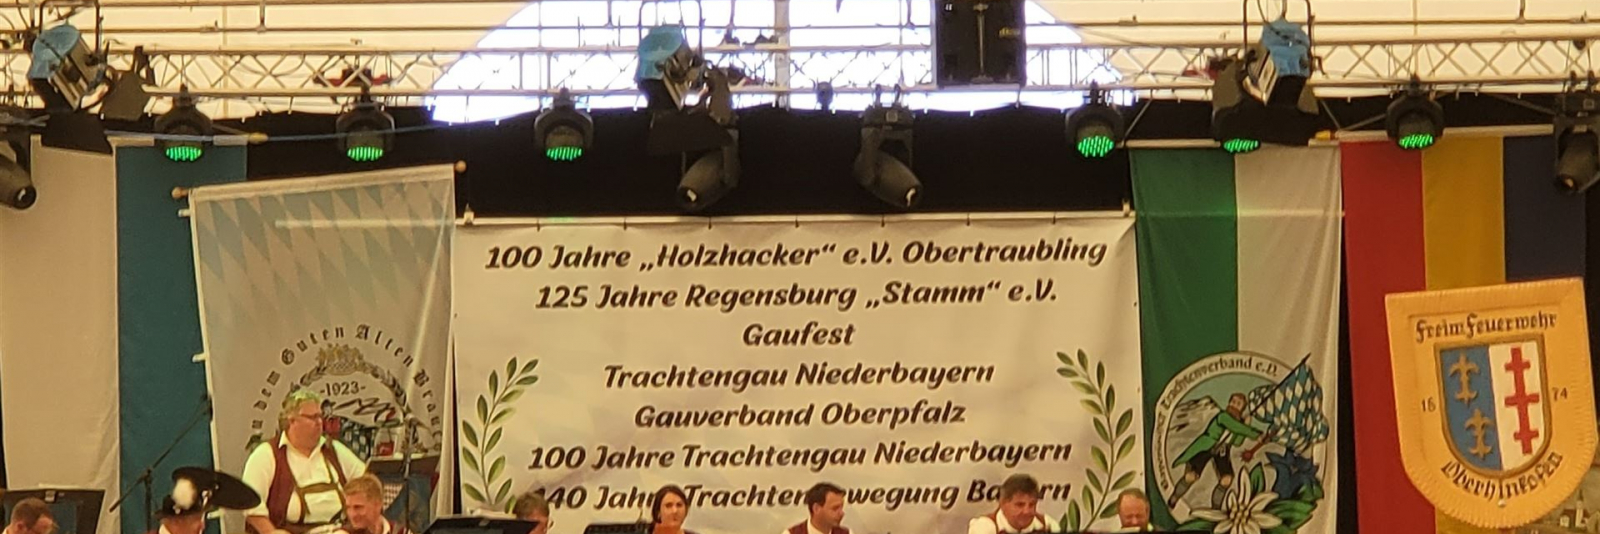 2023-07-02-100Jahre-Holzhacker-Obertraubling-001